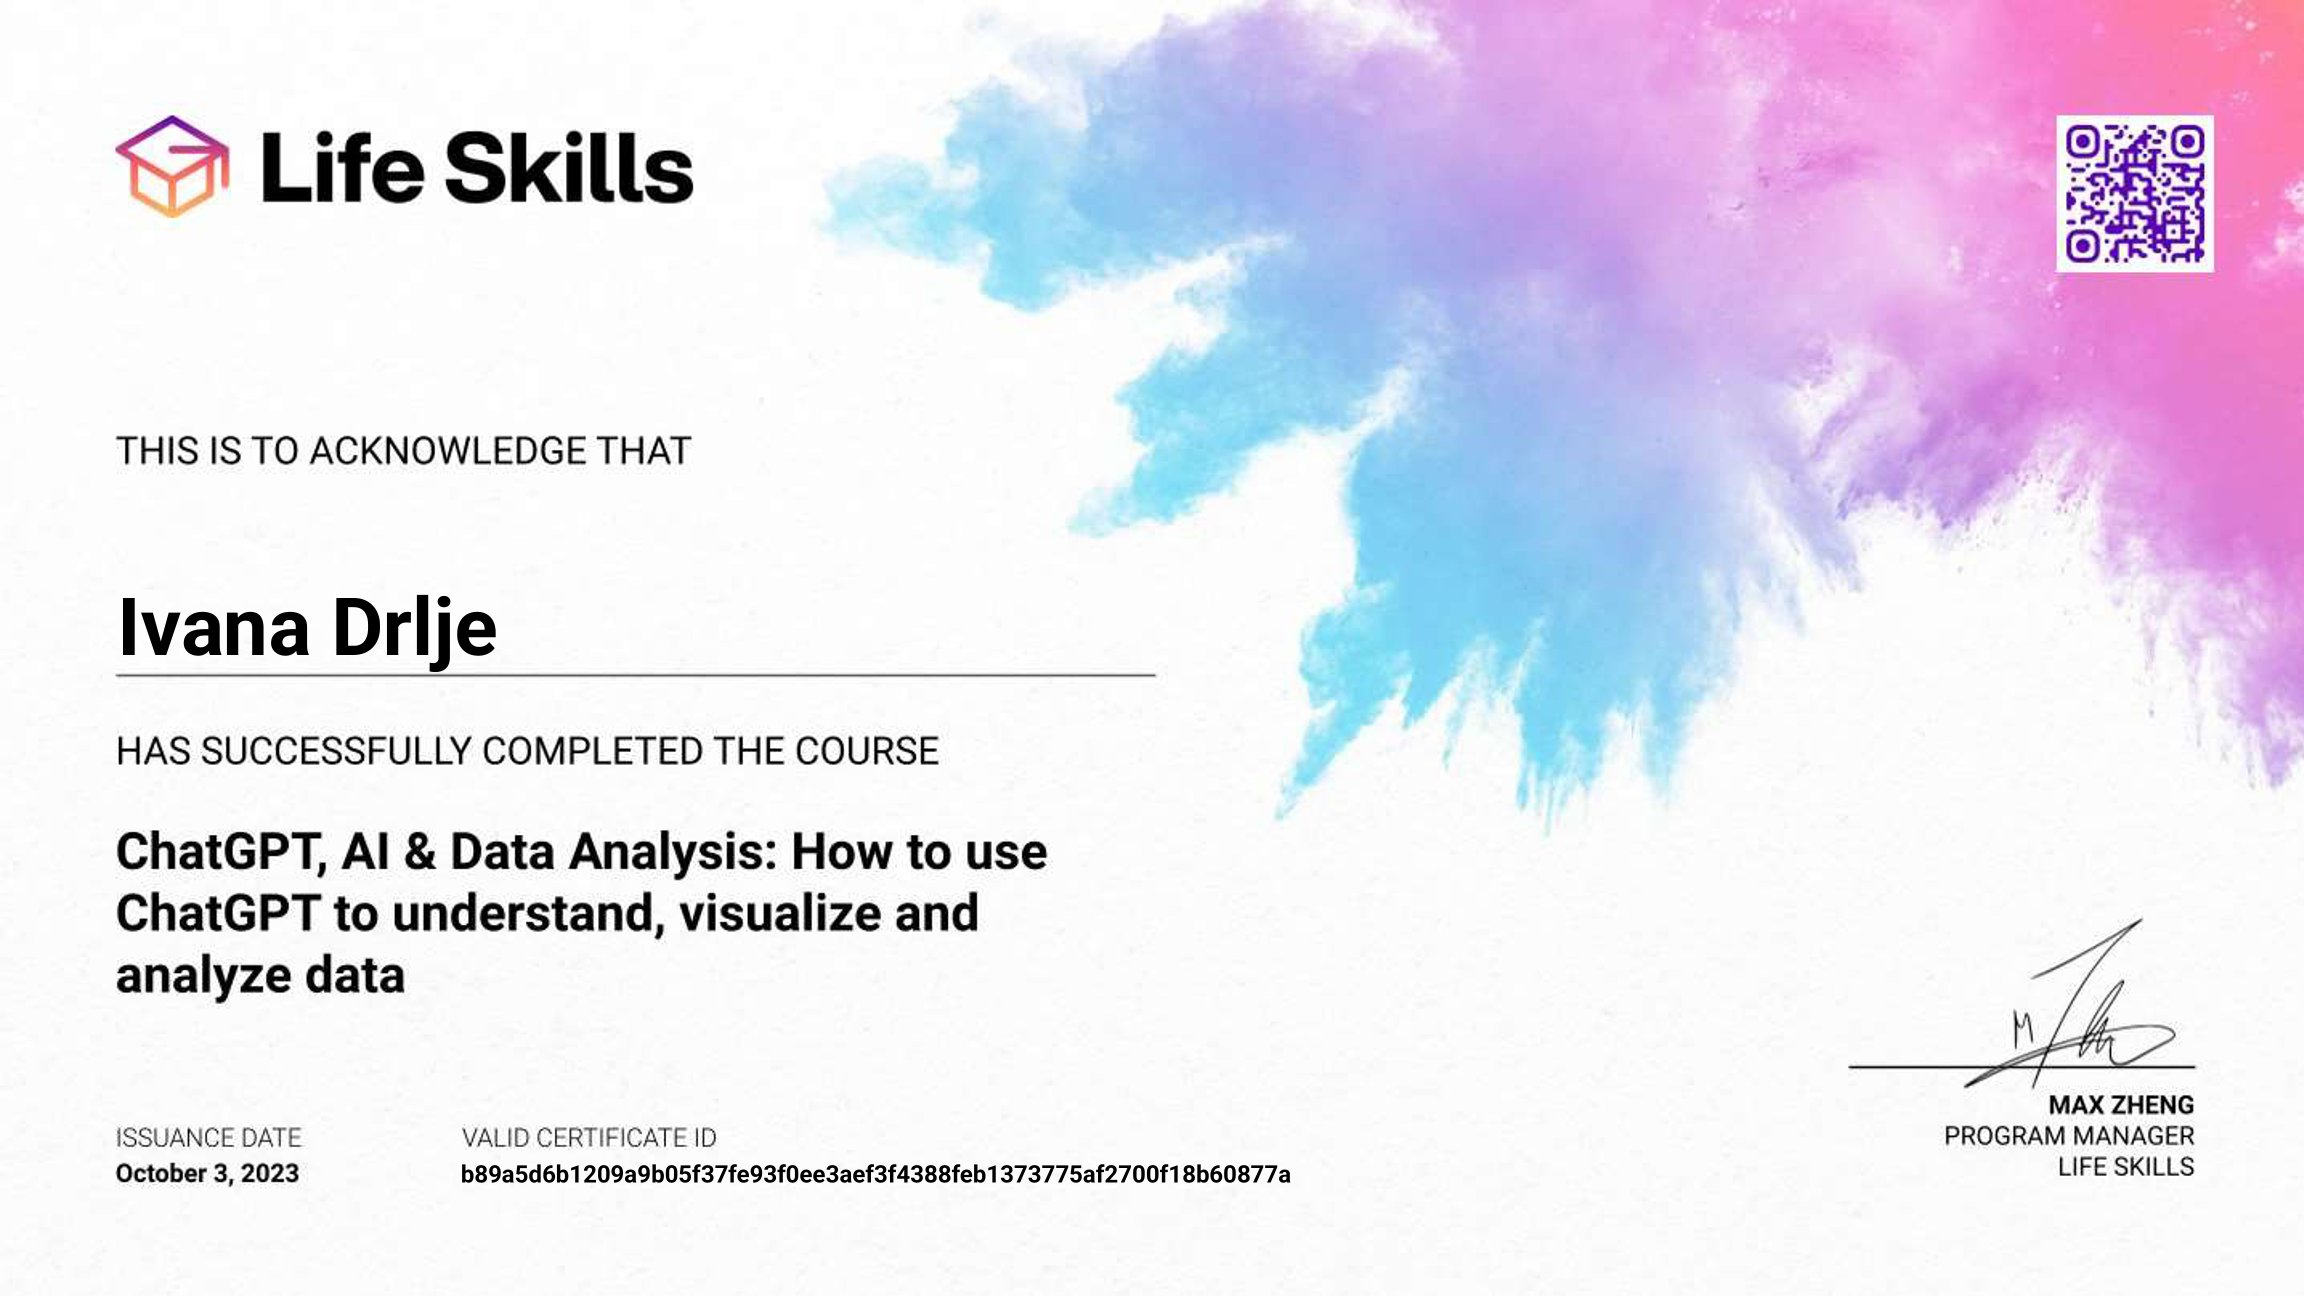 Life Skills - ChatGPT, AI & Data Analysis How to use ChatGPT to understand, visualize and analyze data - Ivana Drlje - Certificate